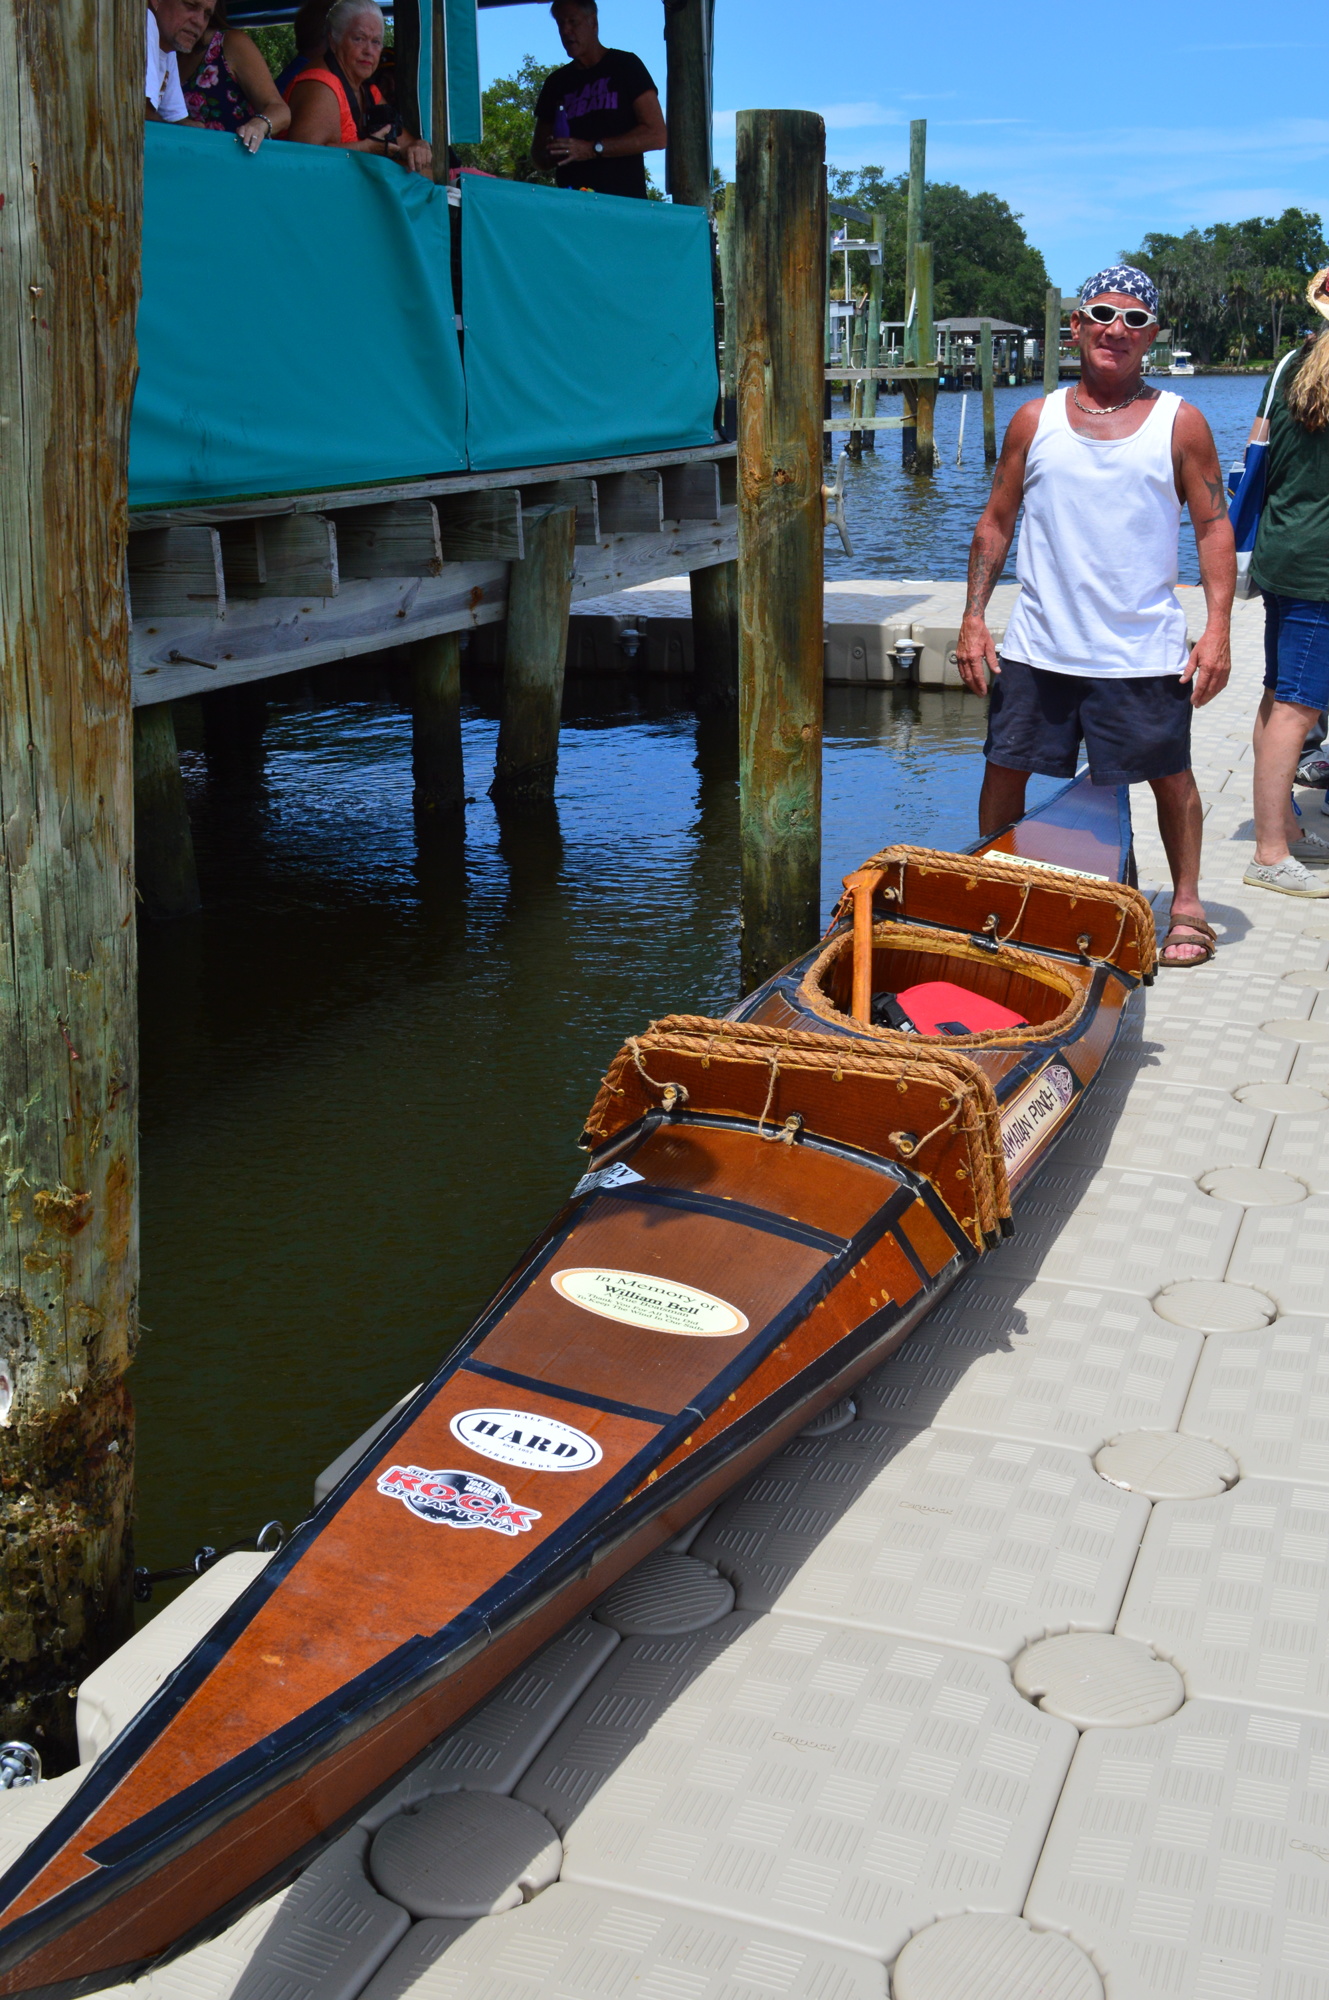 Shaun Ferrarie, of Port Orange, has competed in the Cardboard Boat Regatta for the past 6 years. This year, he races with his four-year-old boat 